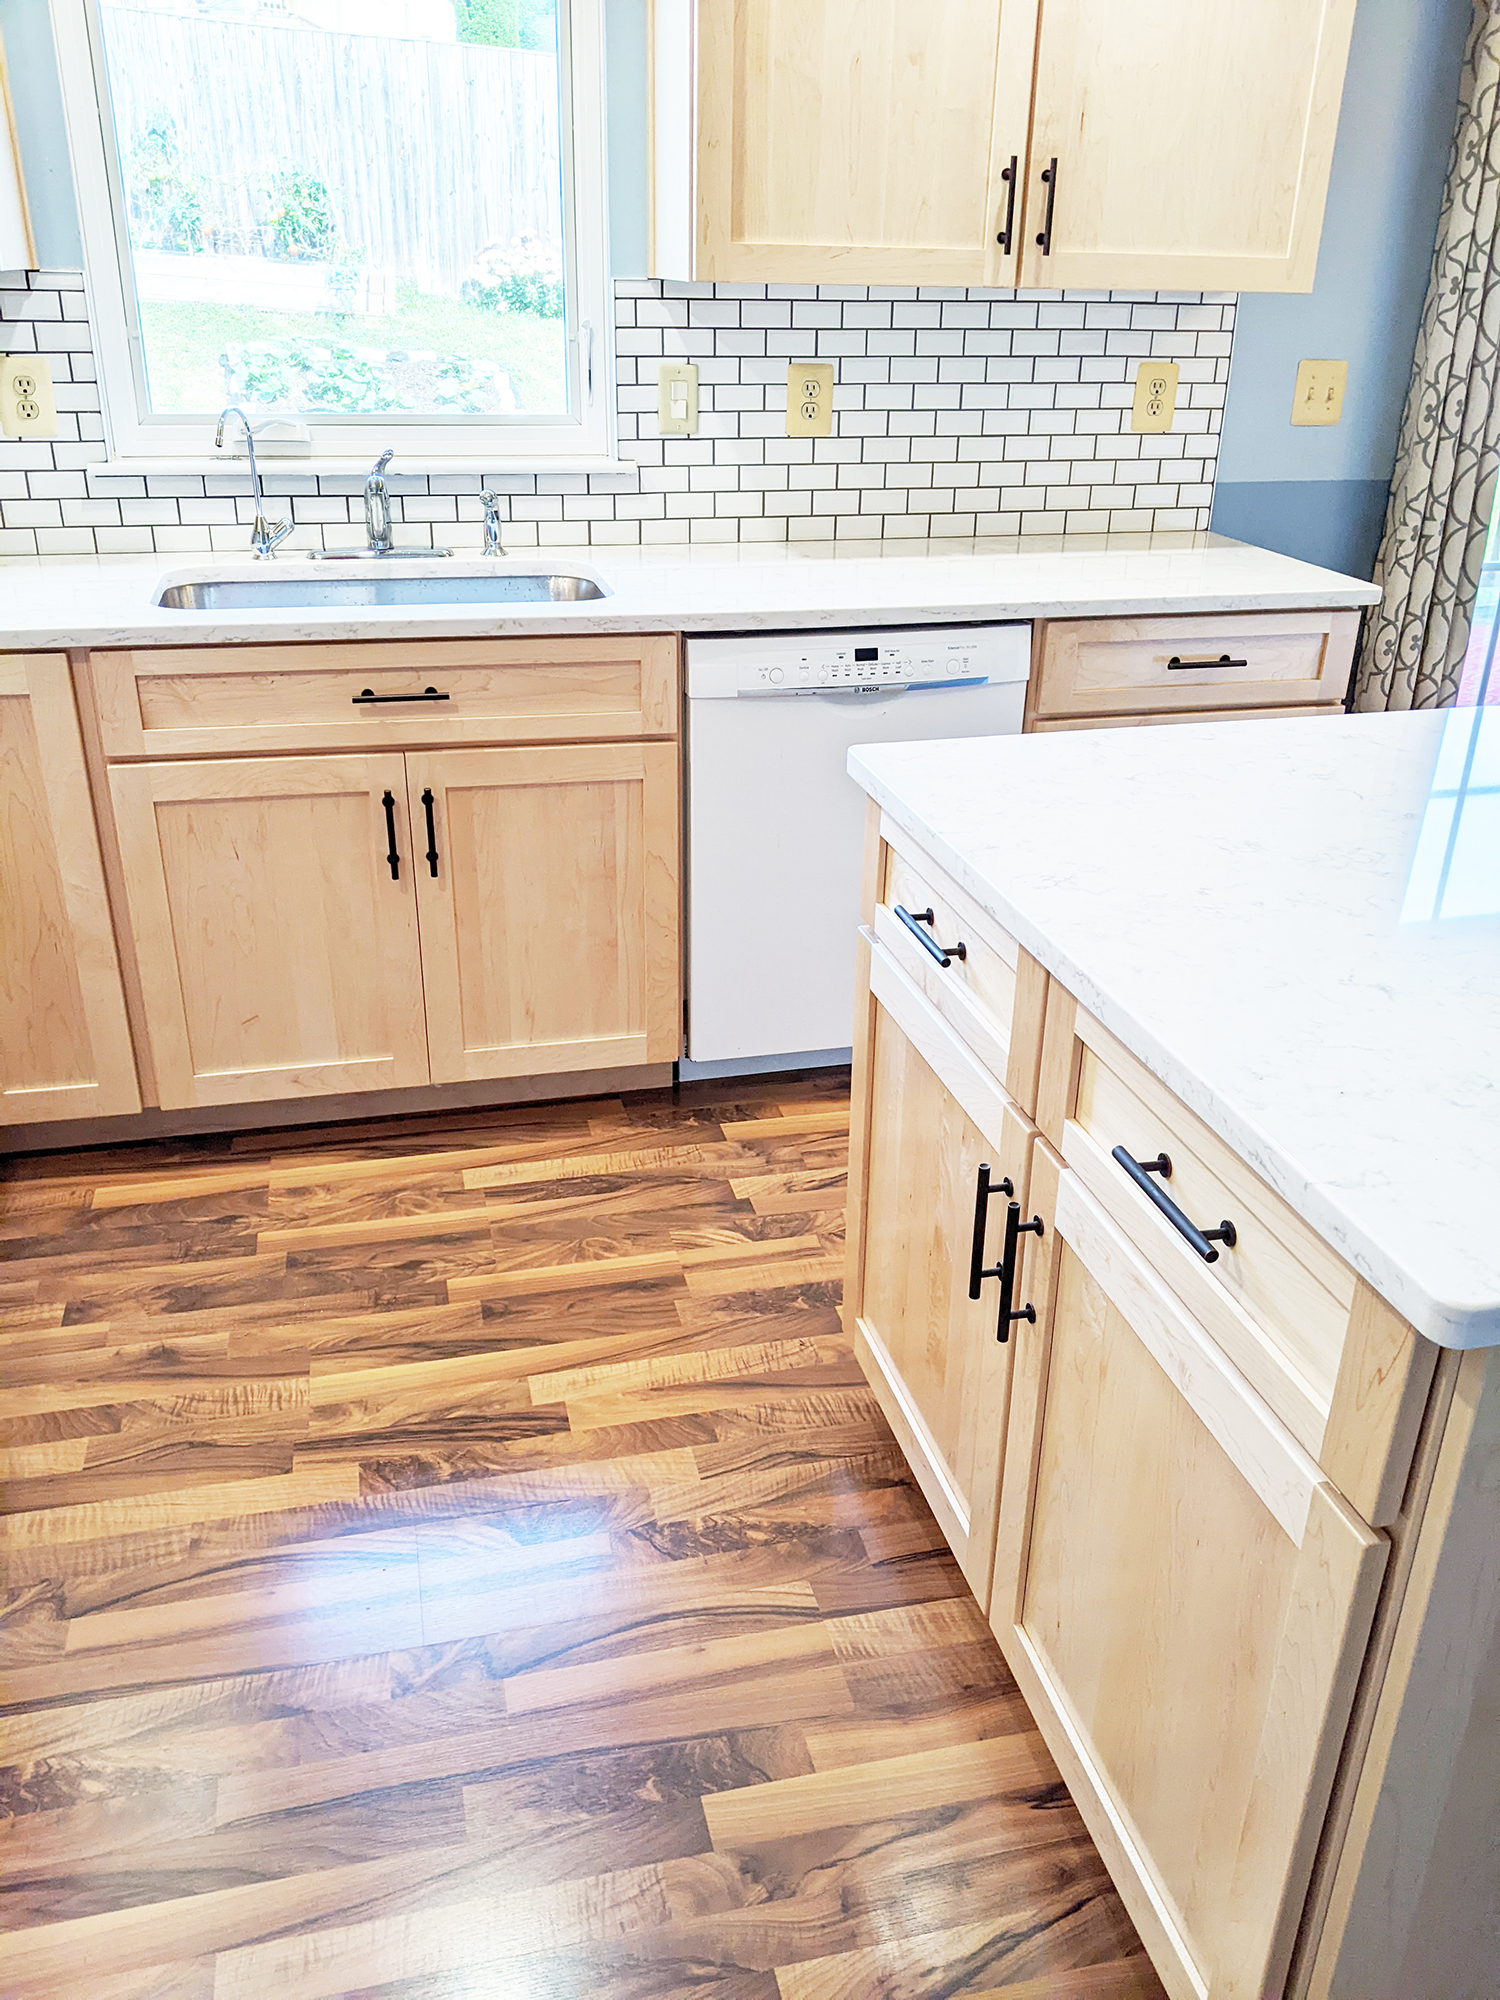 Home remodeling project featuring a kitchen with natural maple cabinets and white quartz countertops